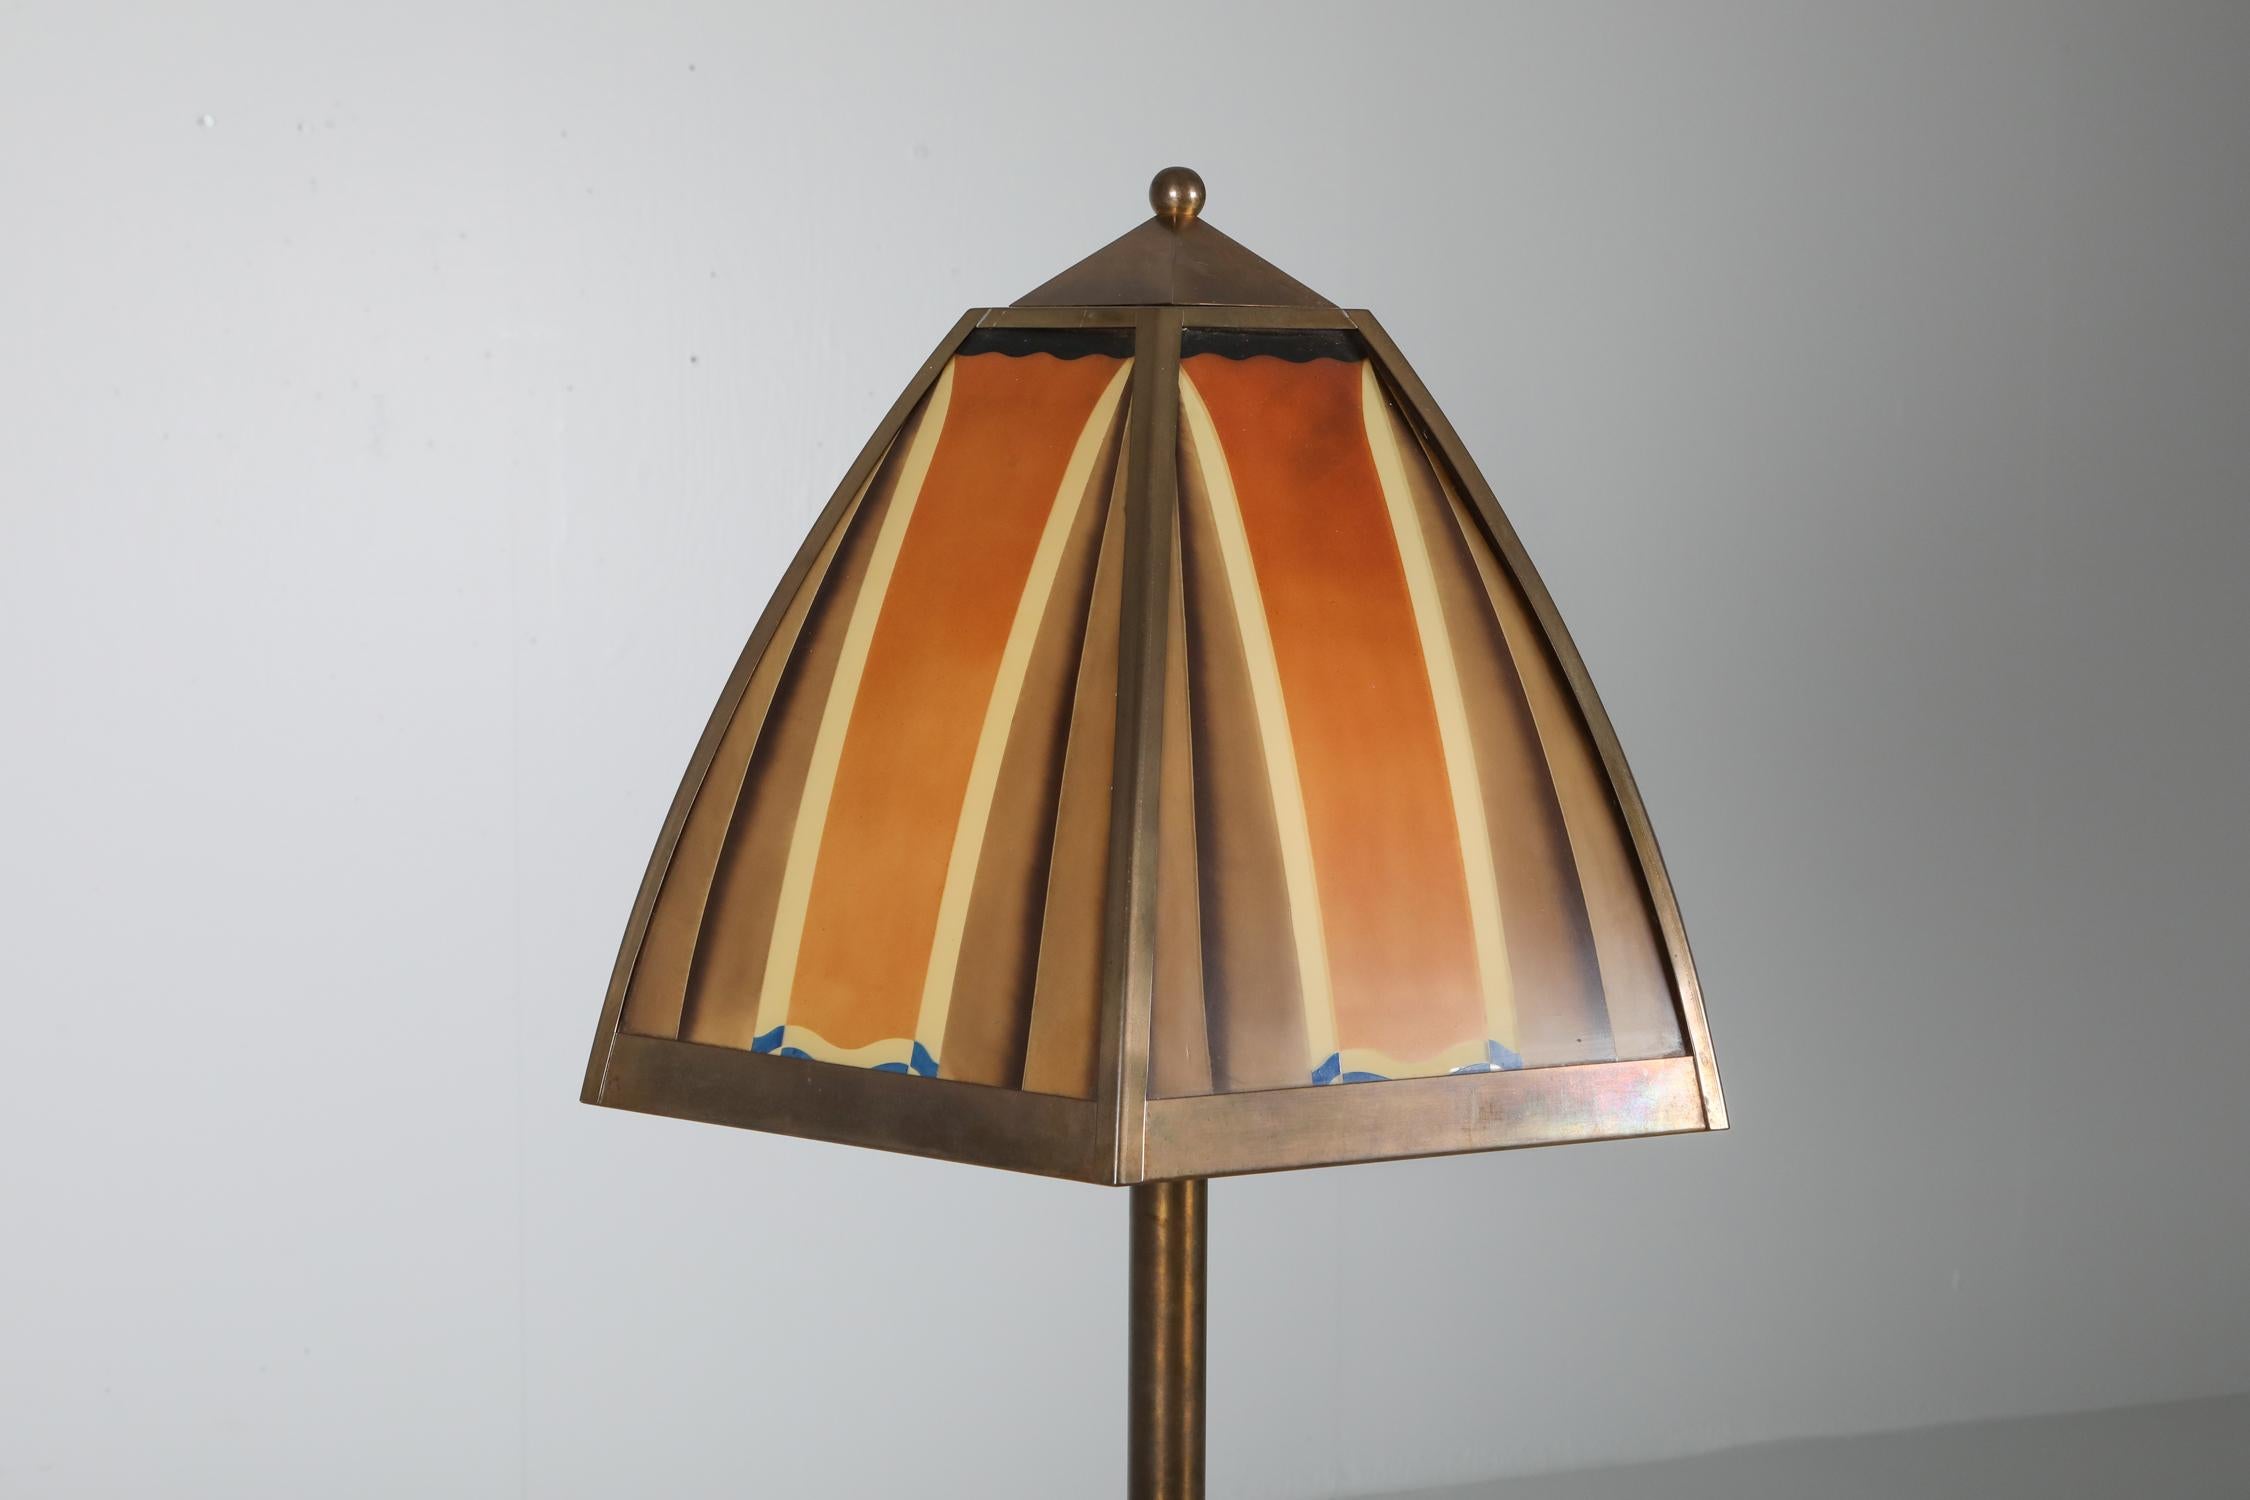 Dutch Bronze and Colored Glass Art Deco Lamp, Netherlands, 1920s